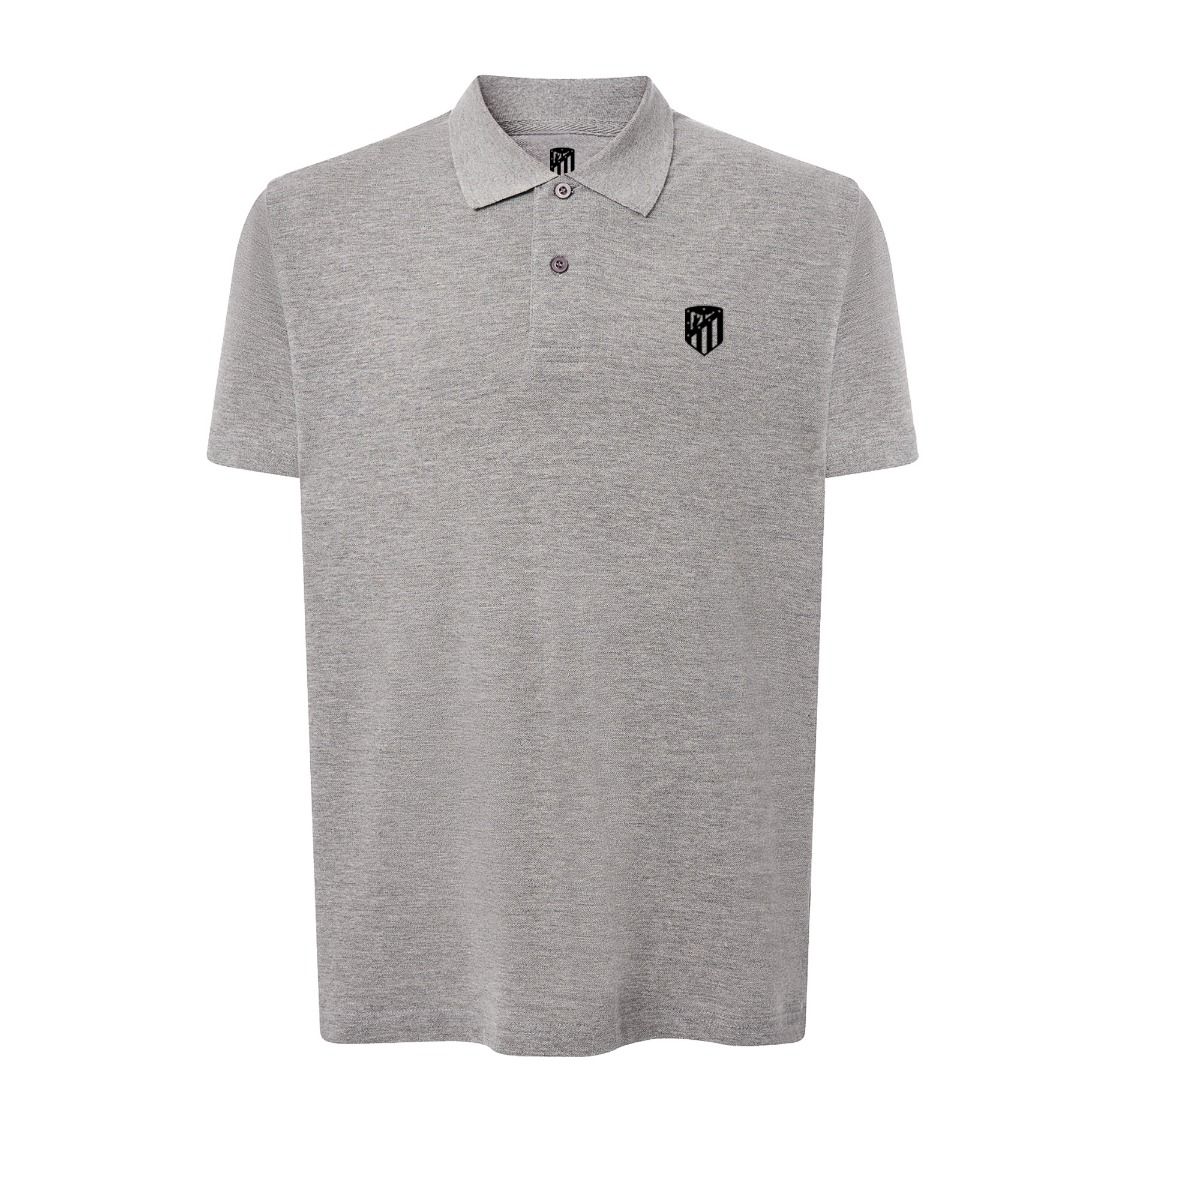 KIDS GRAY POLO RUBBERED CREST image number null